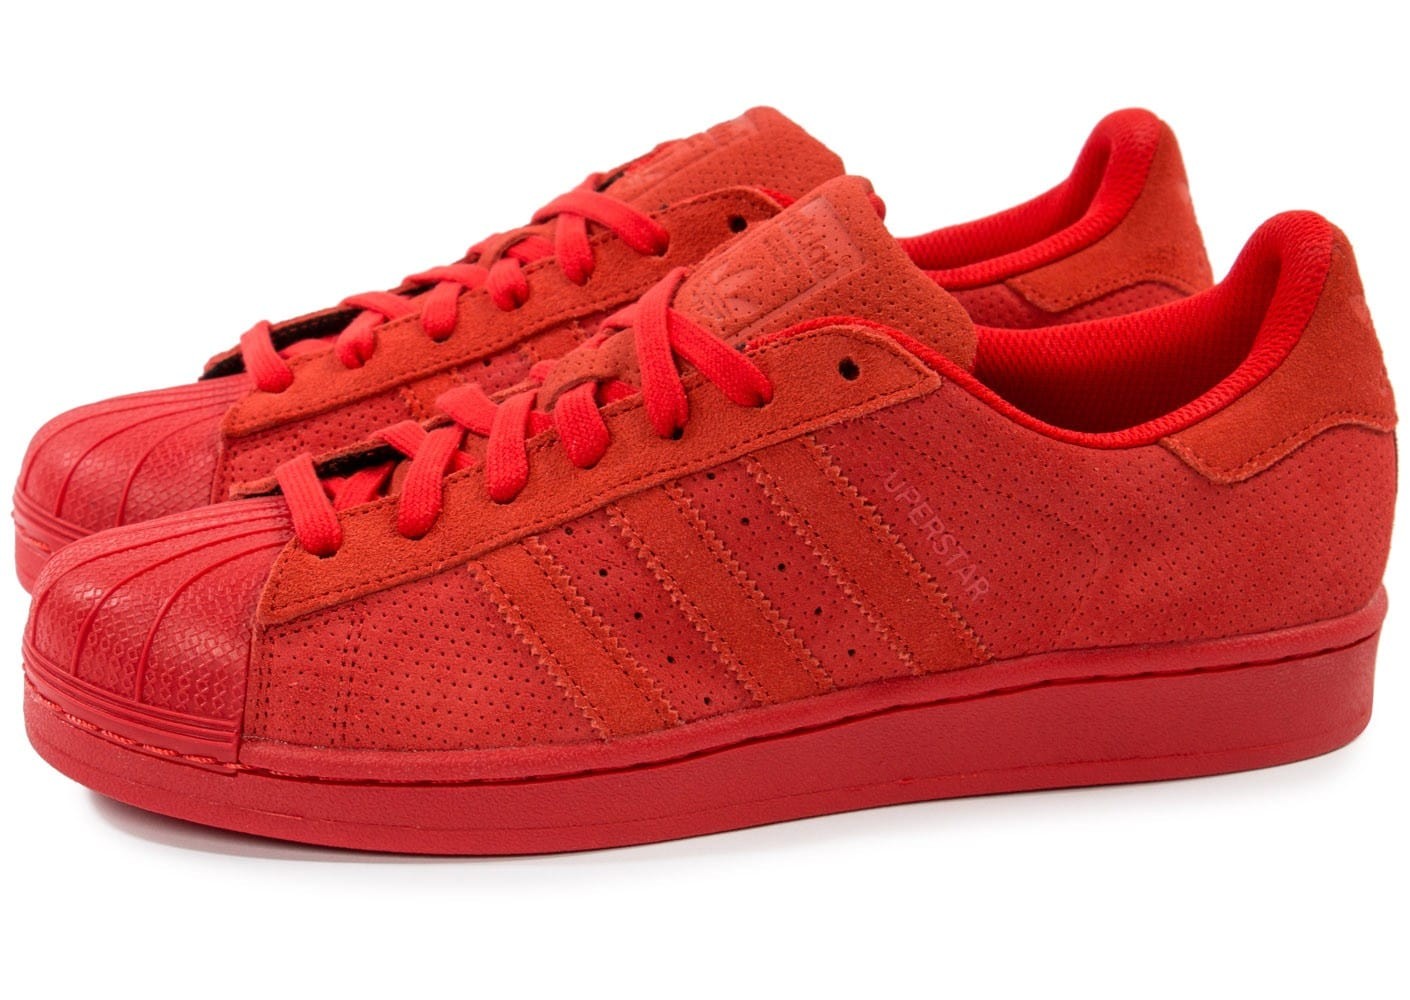 adidas chaussure rouge